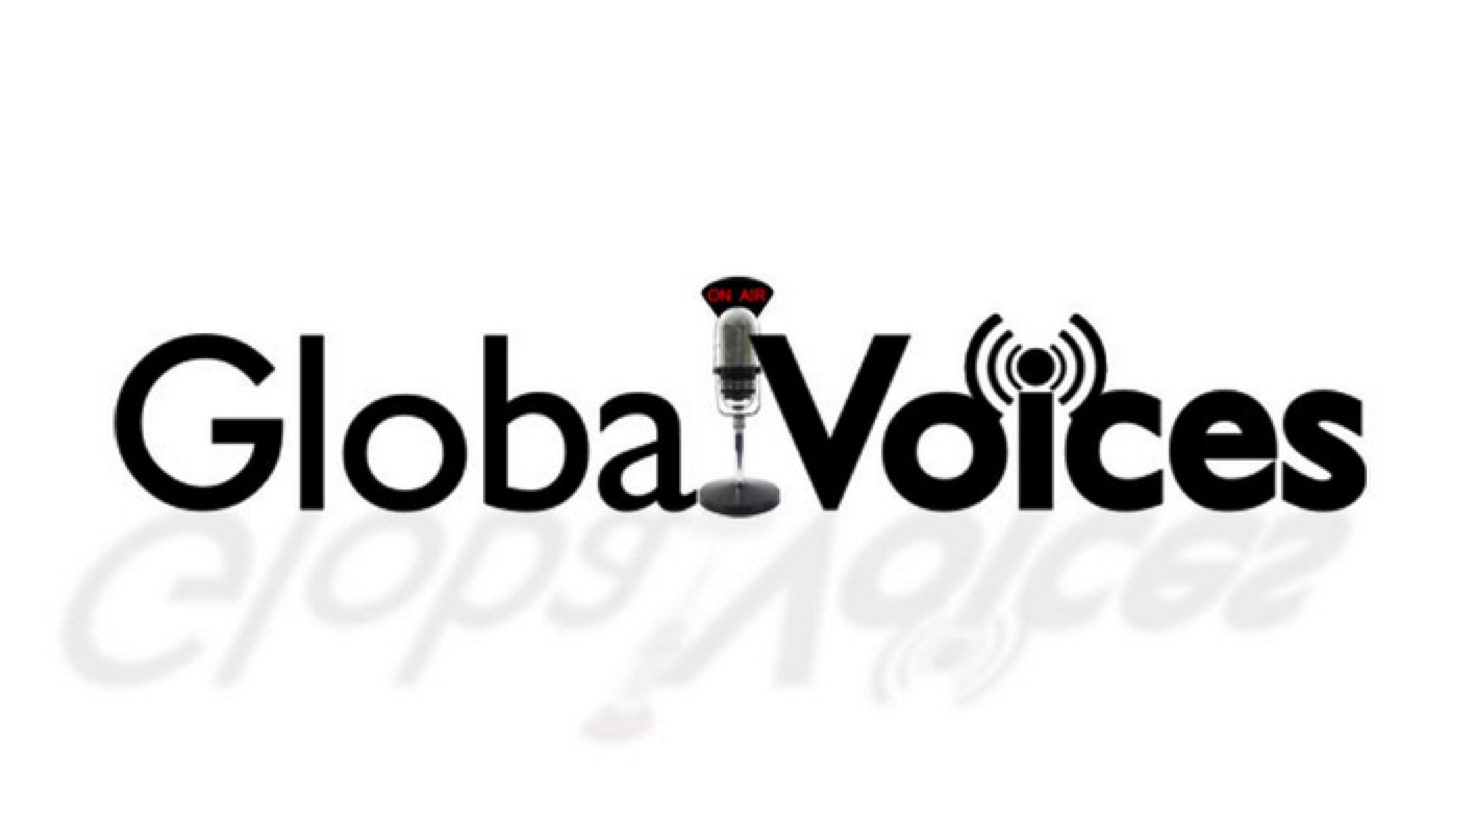 Airtime Pro gives a voice to Global Voices